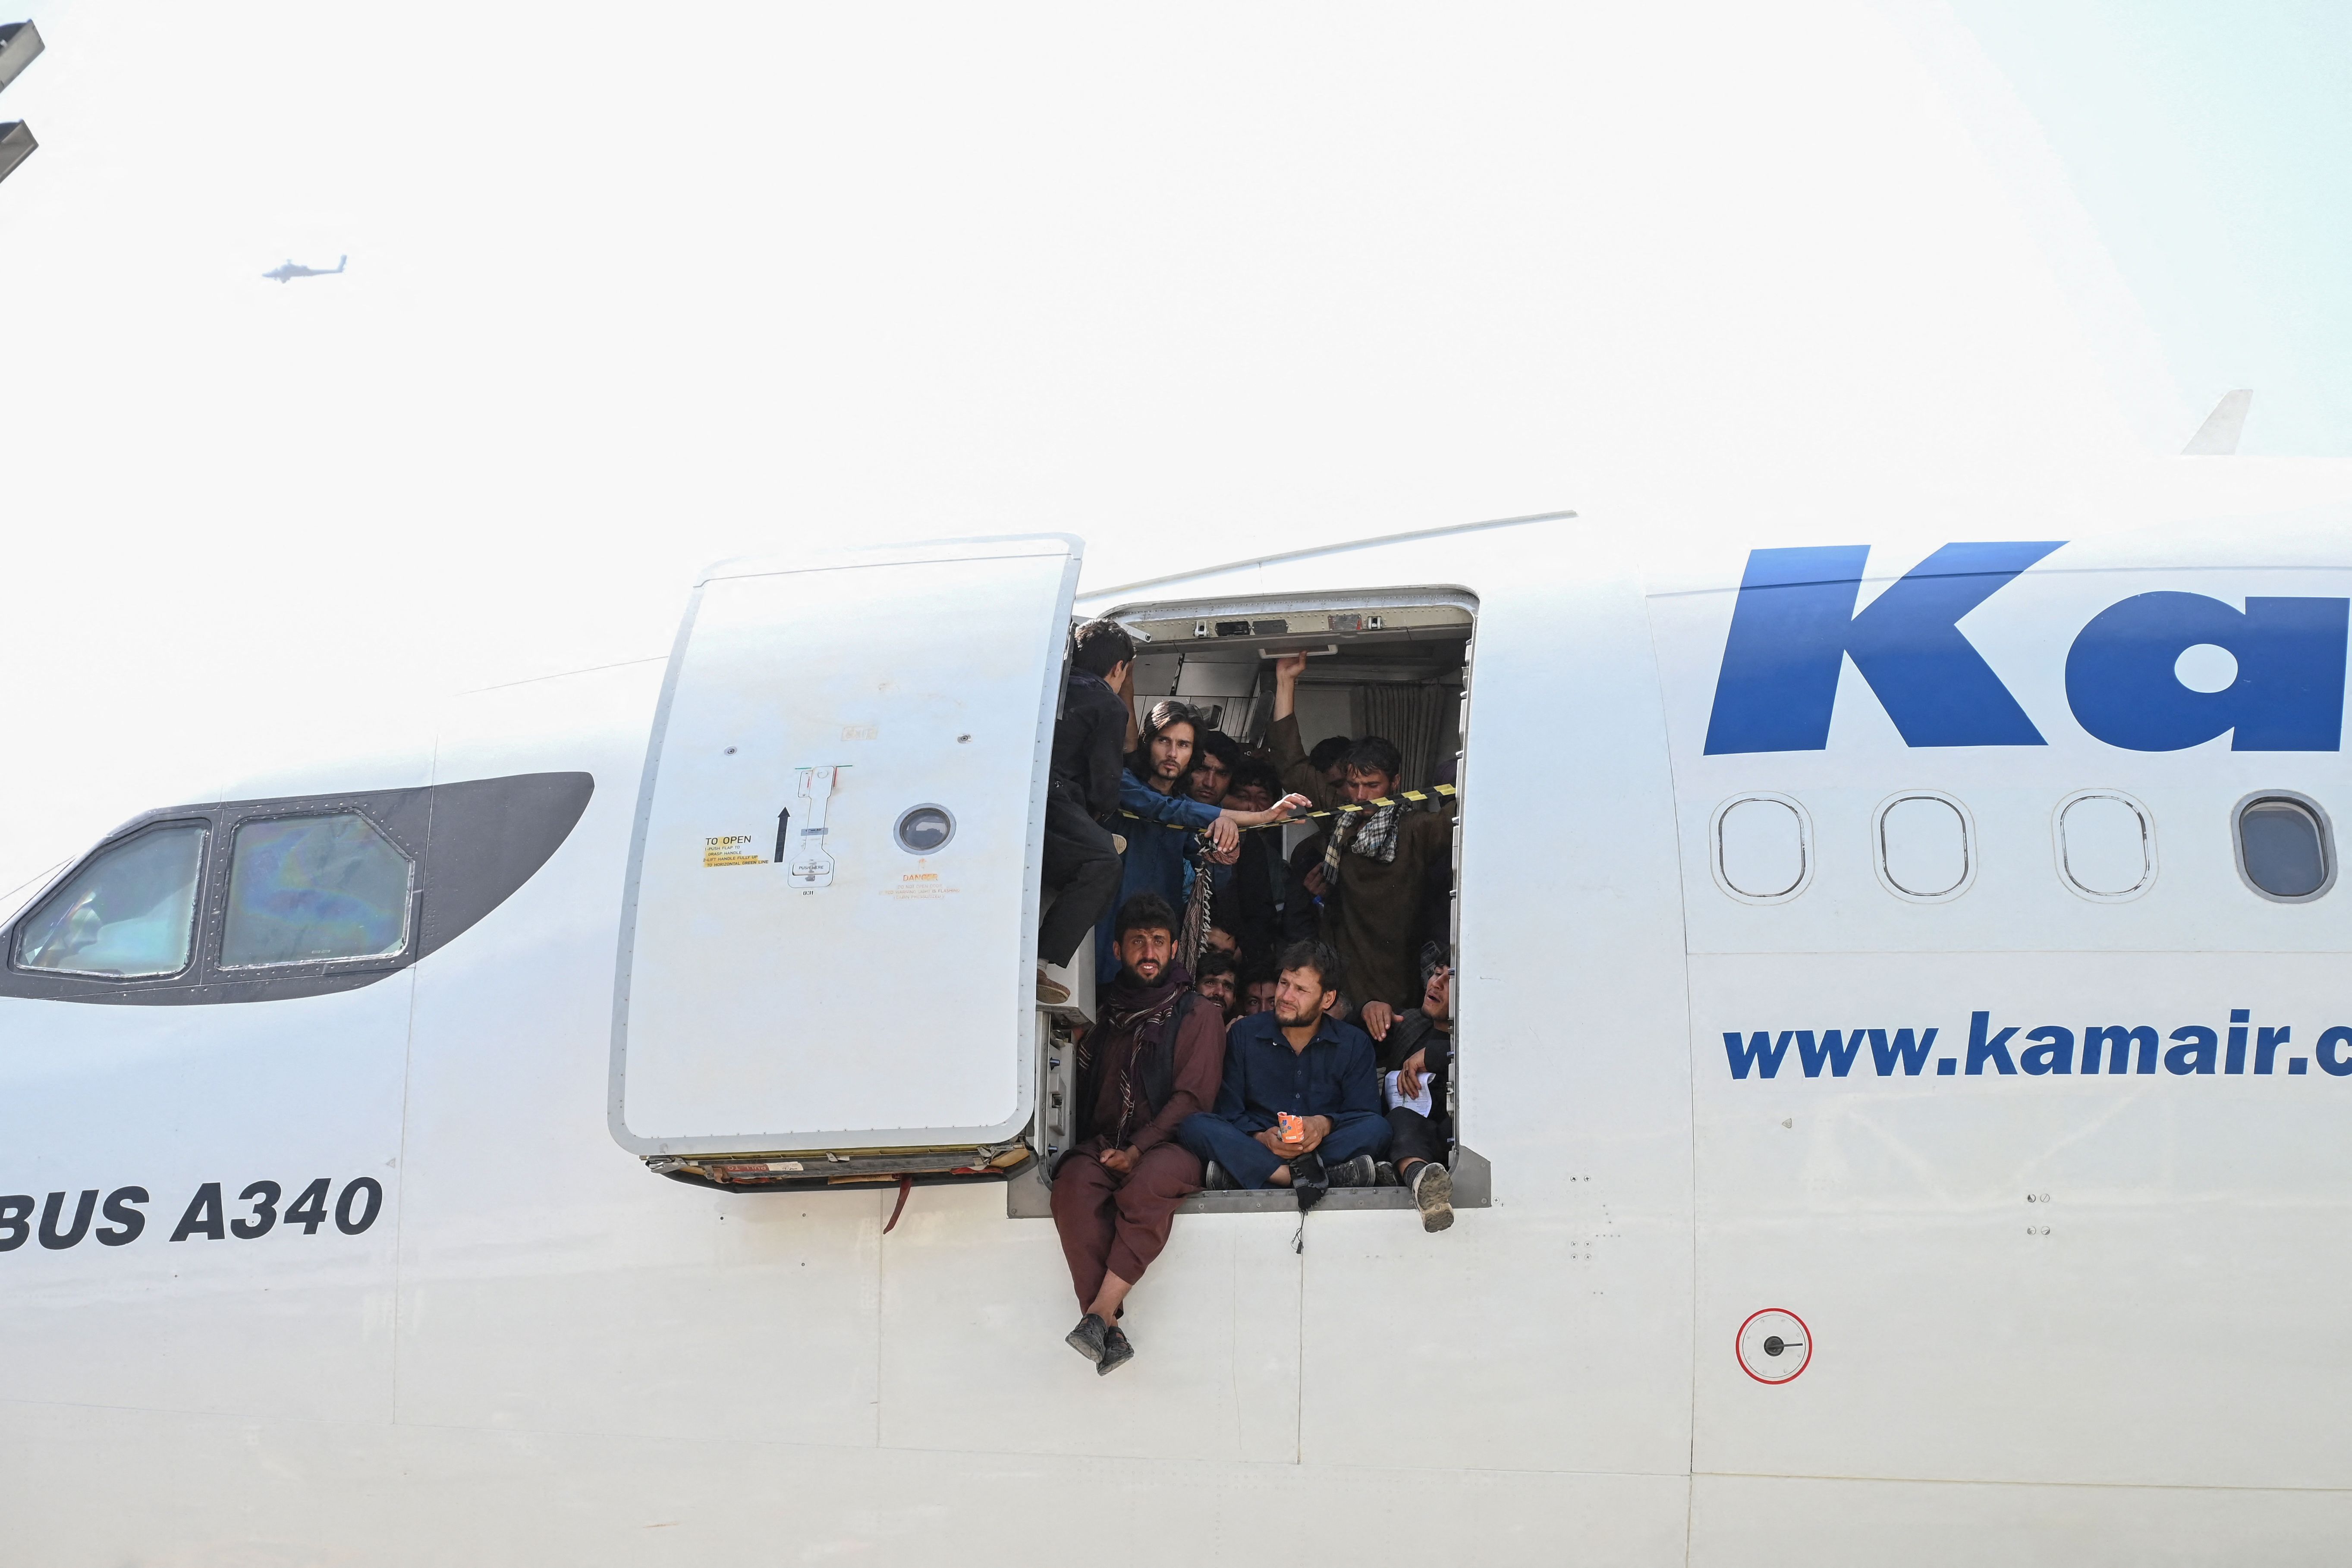 Afghan people climb up on a plane and sit by the door as they wait at the Kabul airport in Kabul on August 16